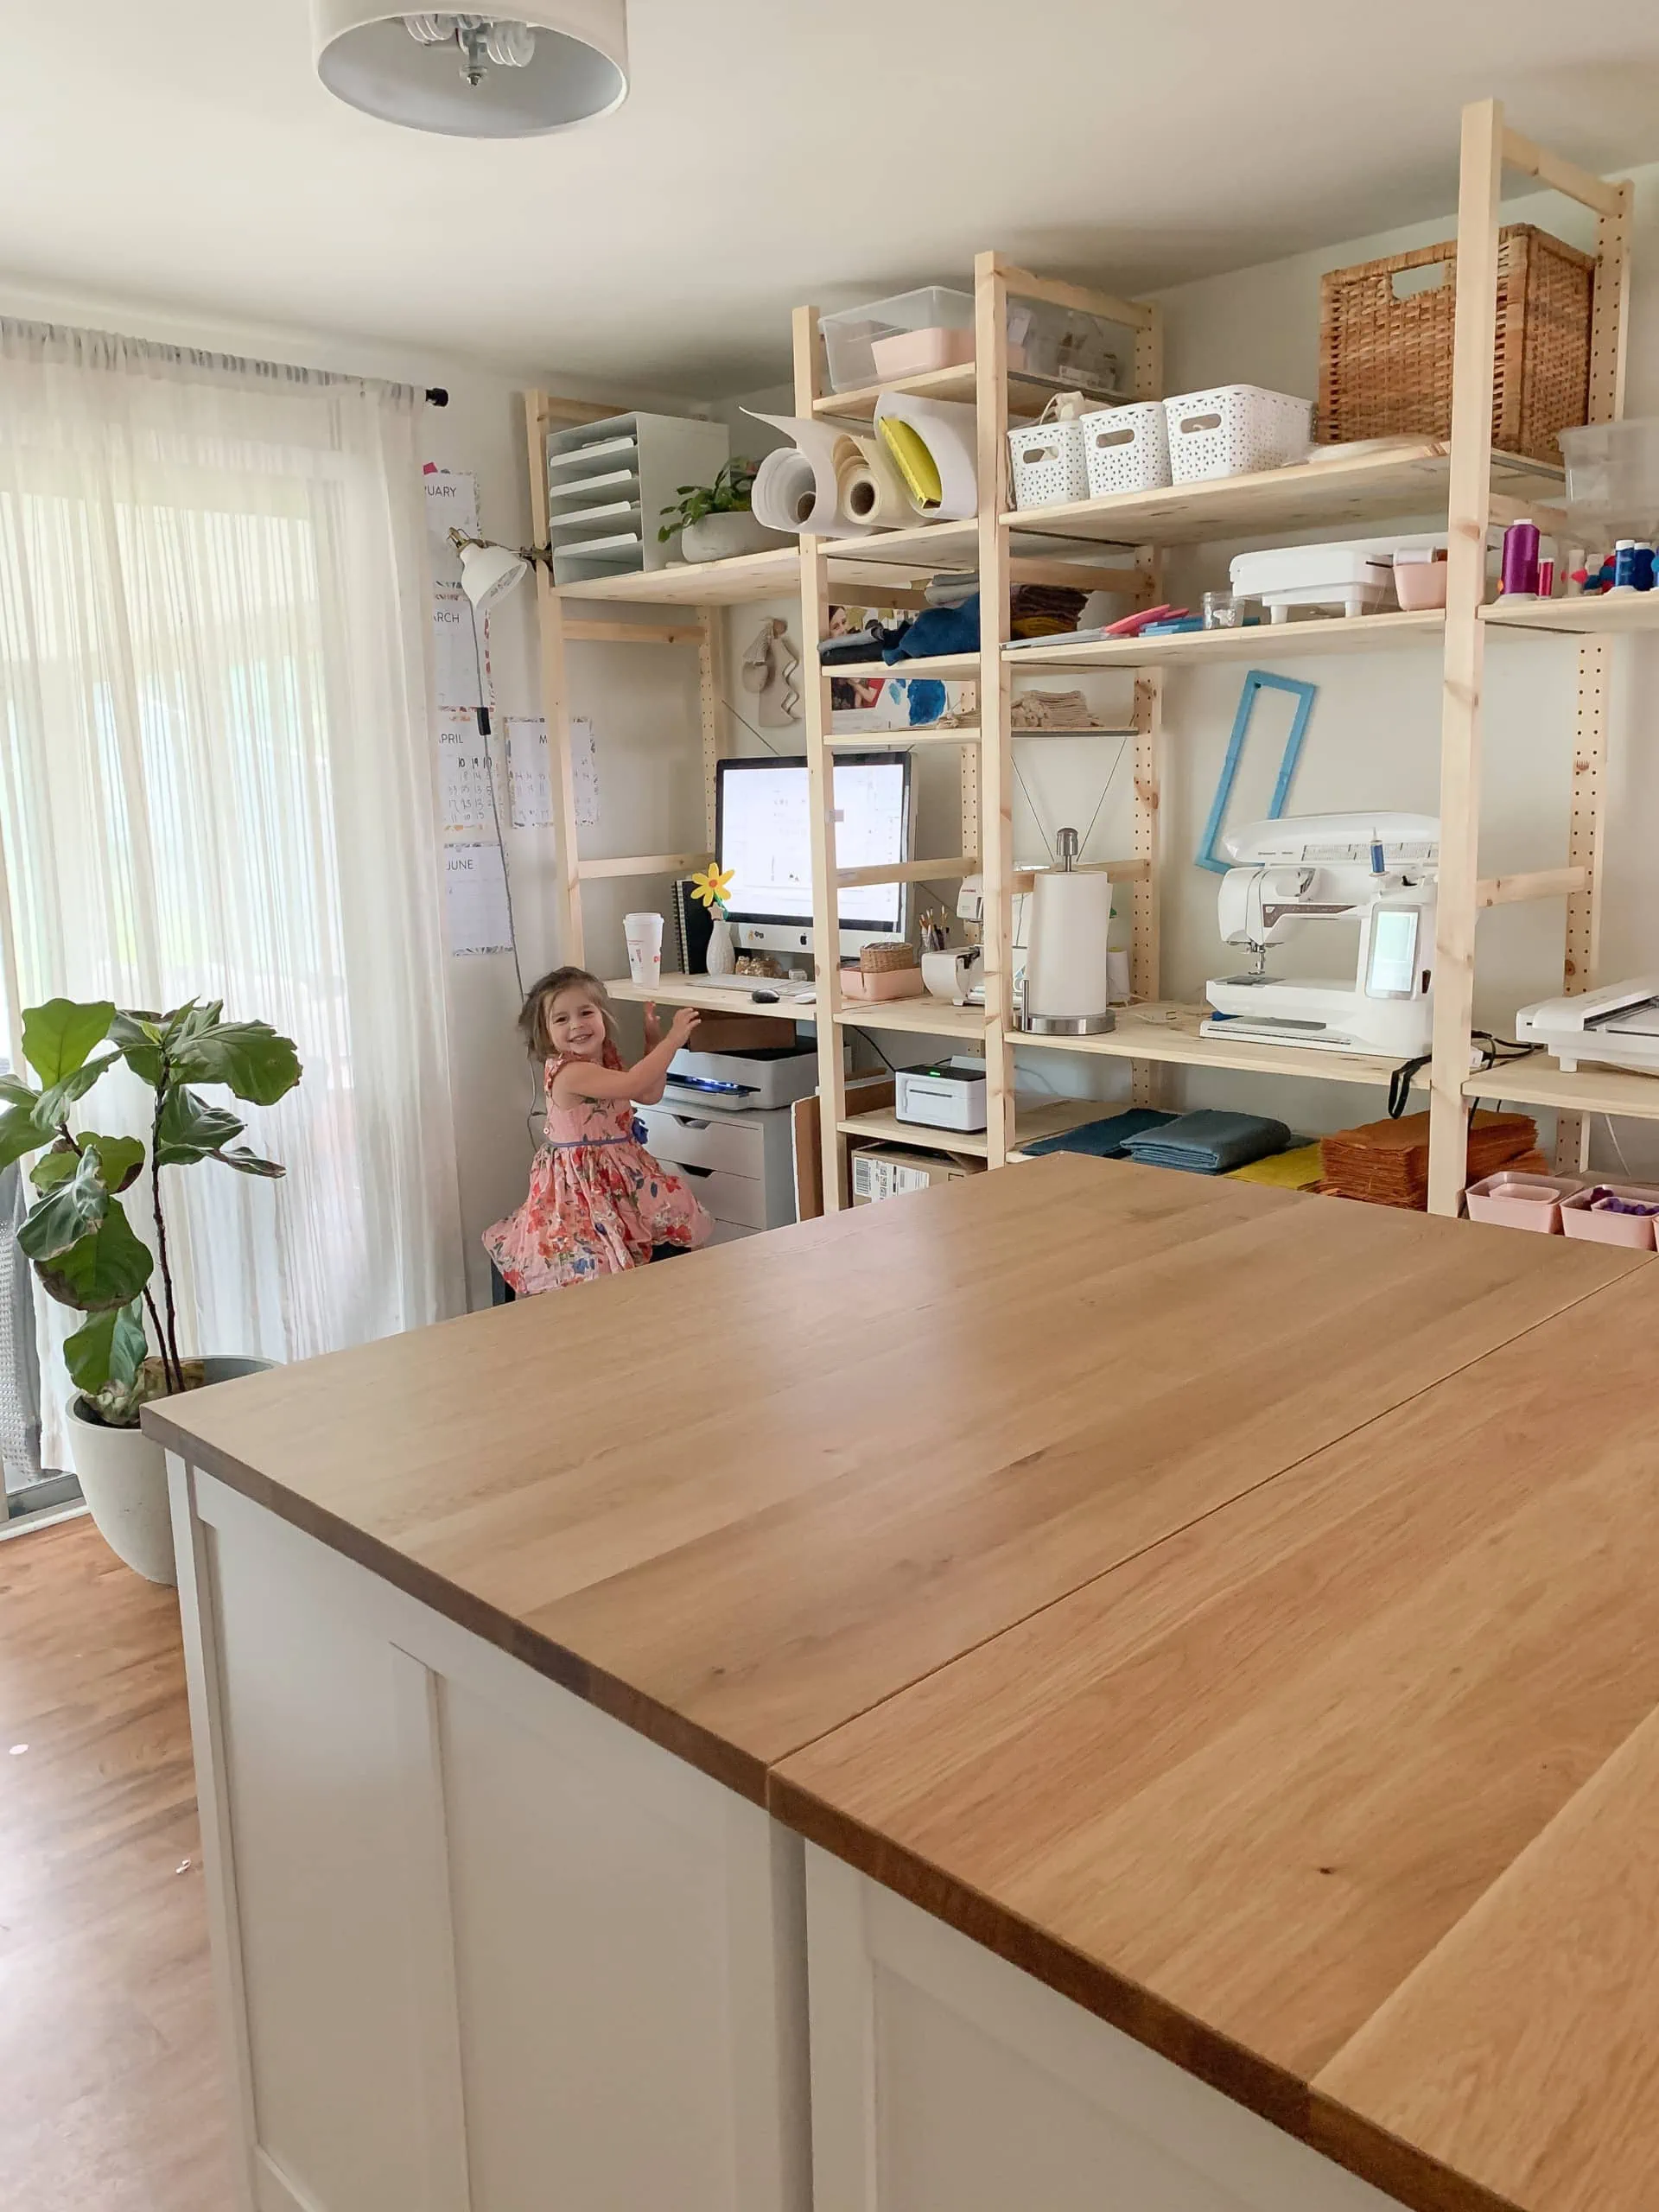 Sarah Cambio's workspace. There's a big wooden island, open wooden shelves filled with materials, and a fiddle leaf fig. Sarah's daughter is wearing pink and sitting by the shelves at a computer.